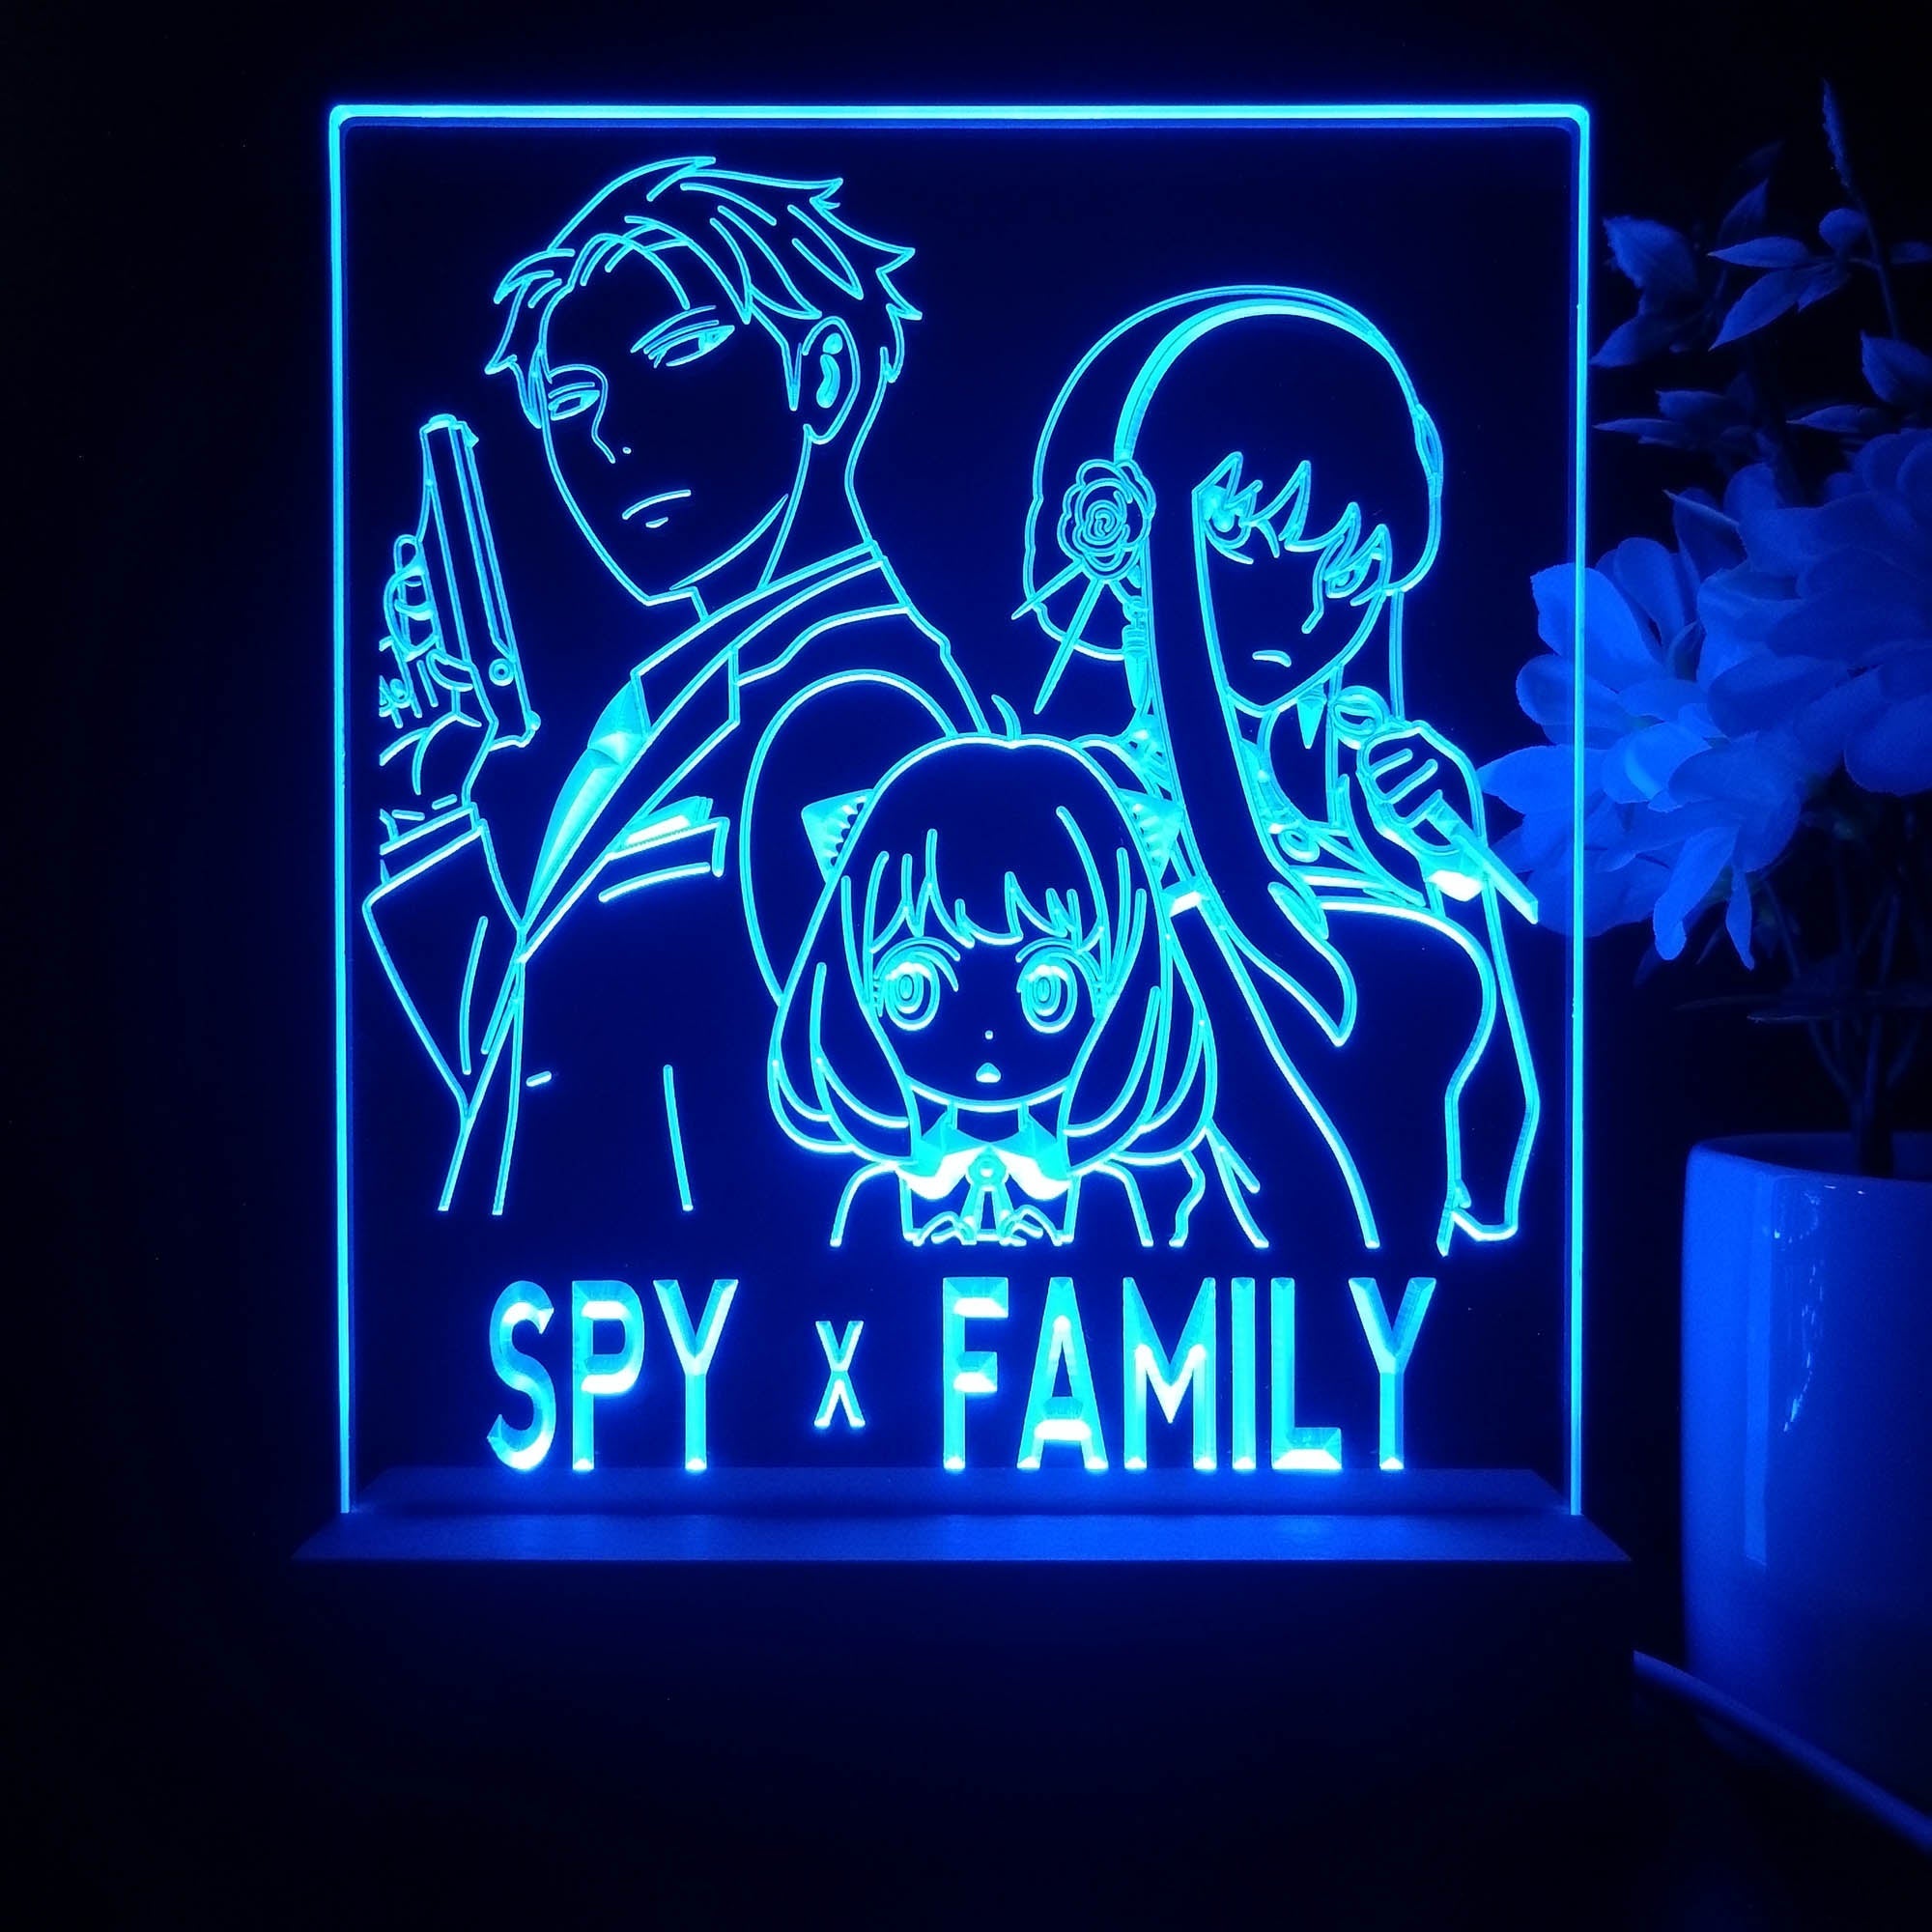 Spy × Family Game Room LED Sign Lamp Display